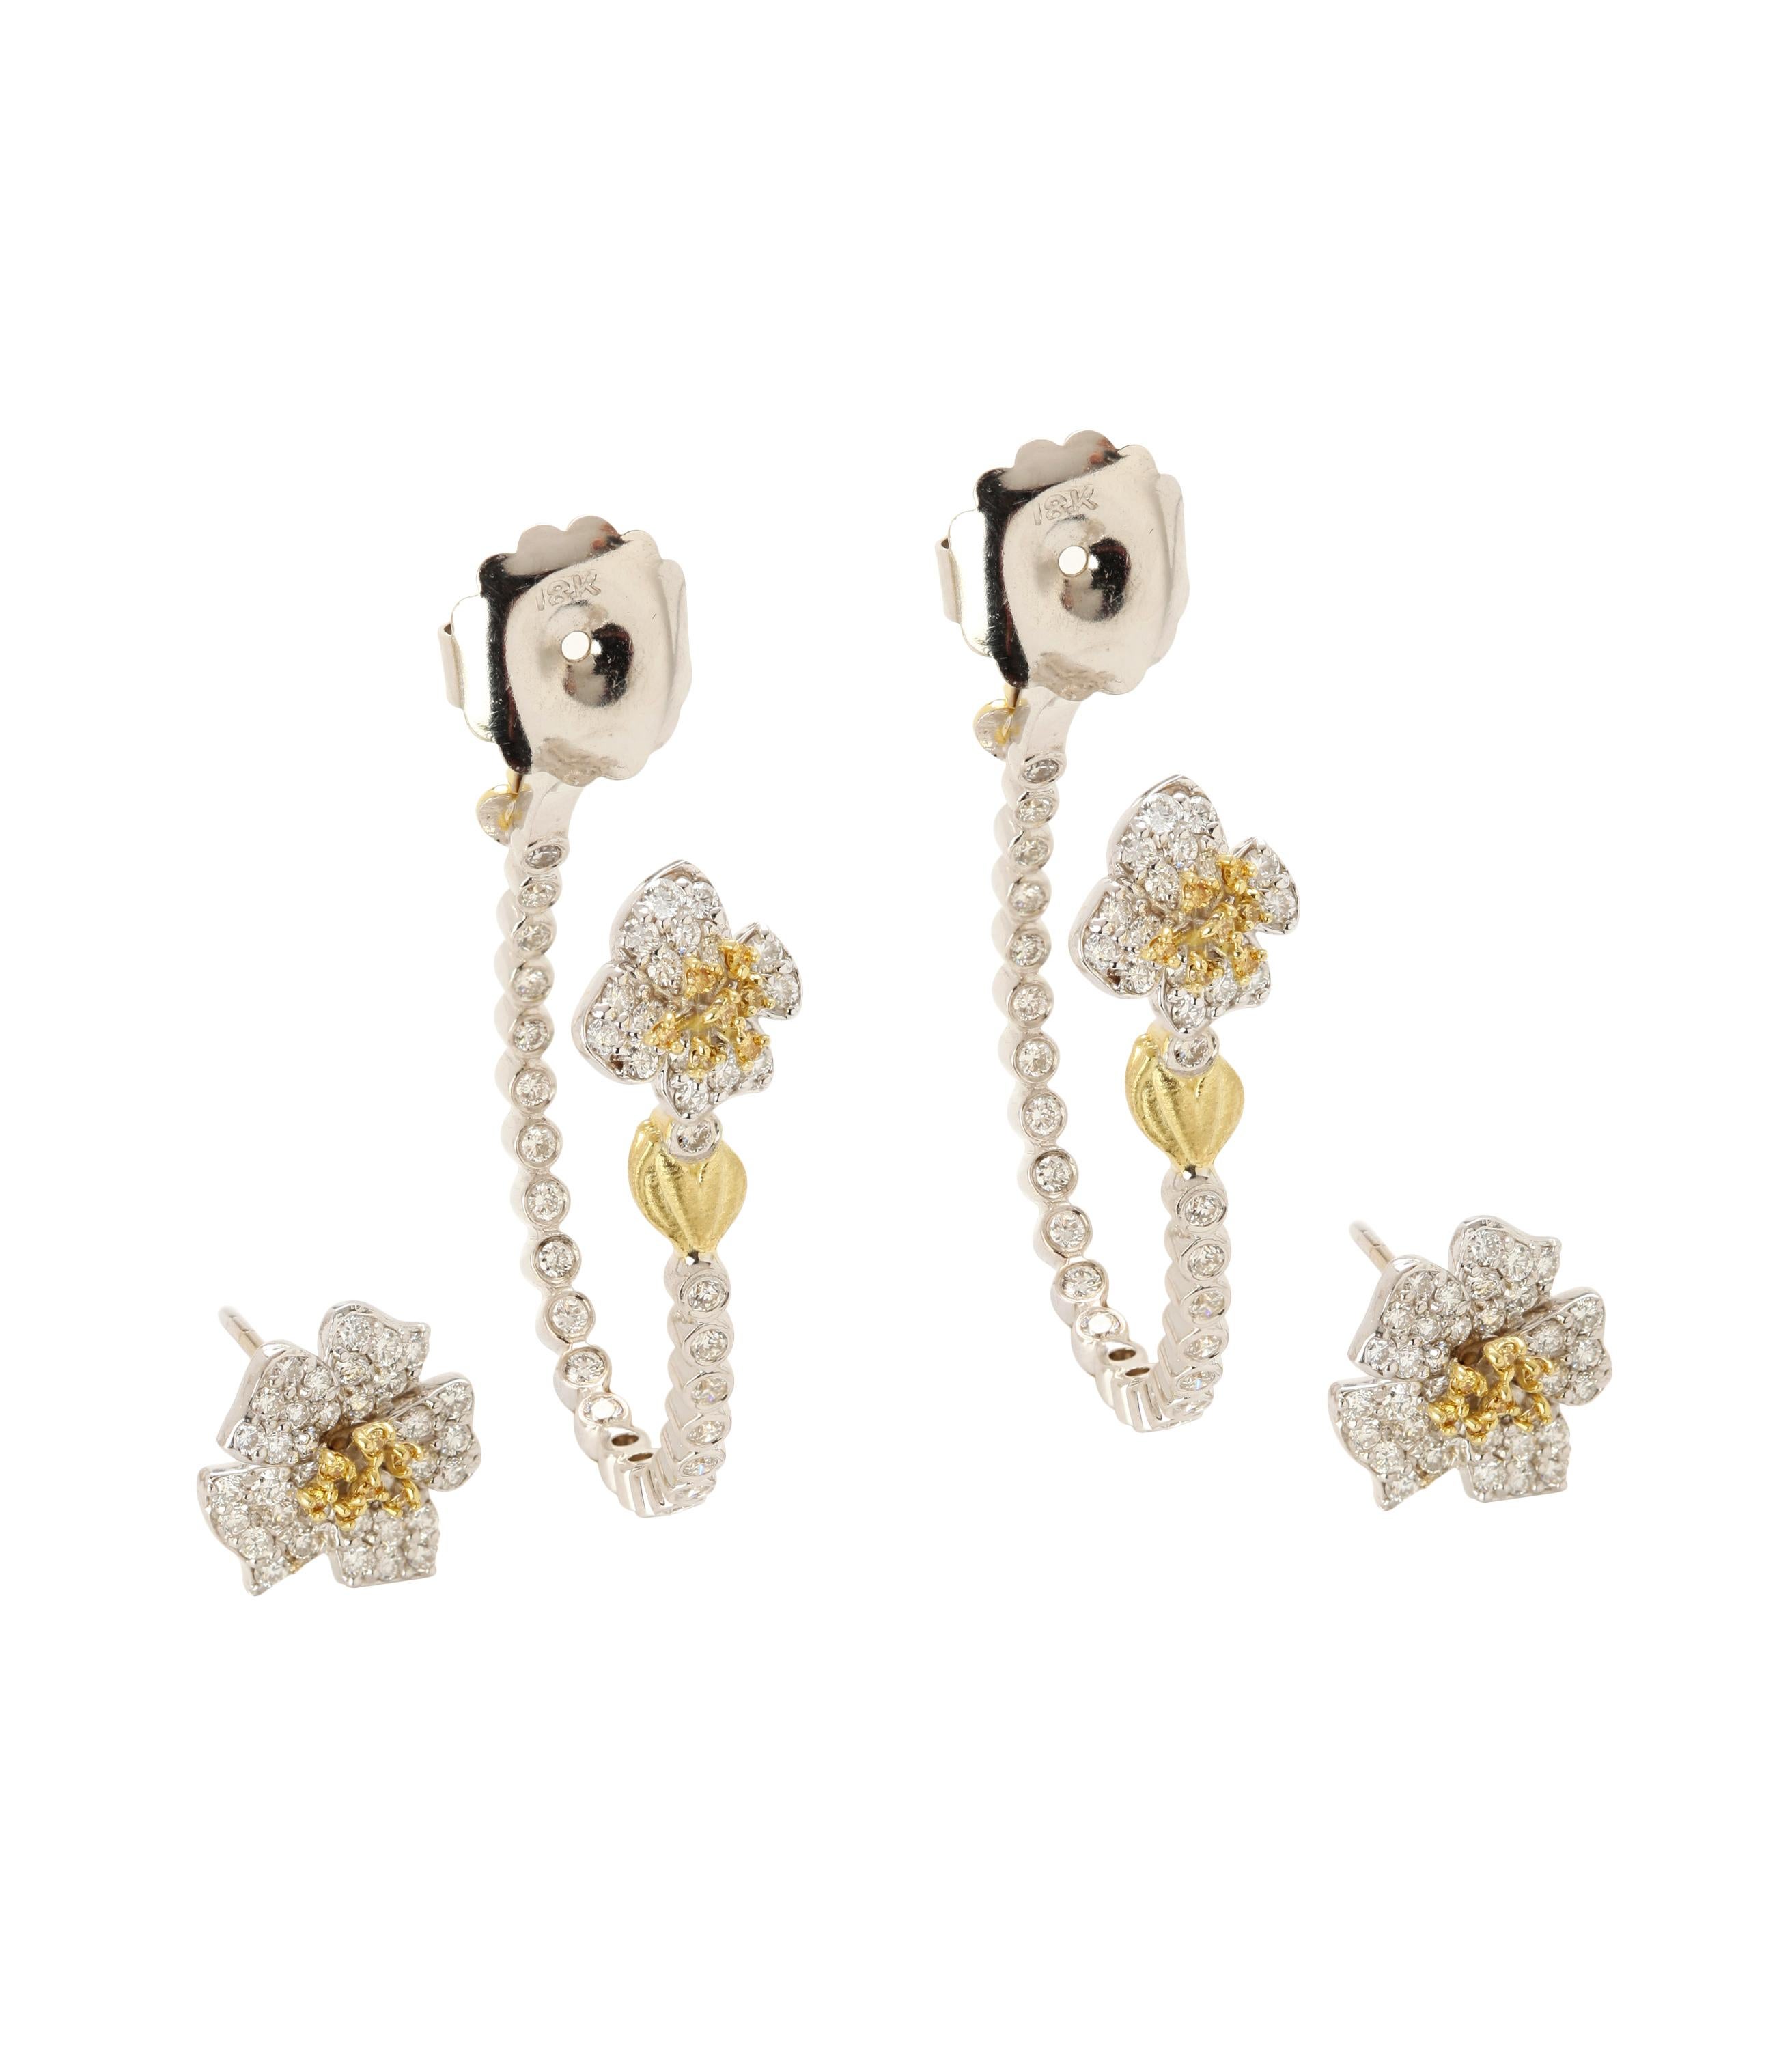 18K Yellow and White Gold Two Piece Earrings with Yellow and White Diamonds

Earrings are two piece earrings meaning the flower with yellow and white diamonds are worn from front while rest of earrings are worn from back.

1.86ct. G Color, VS